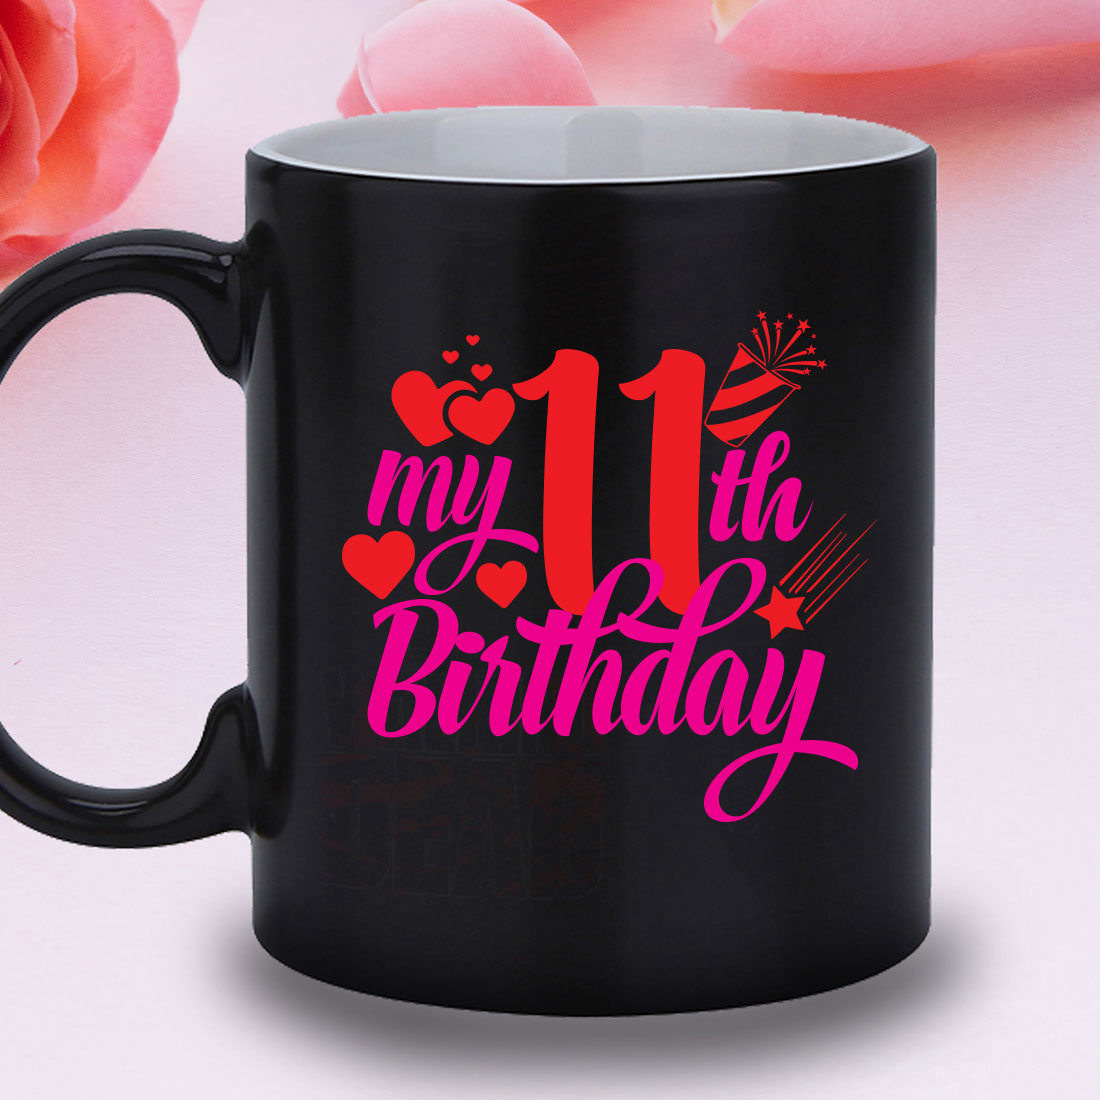 Black coffee mug with a pink number 11 on it.